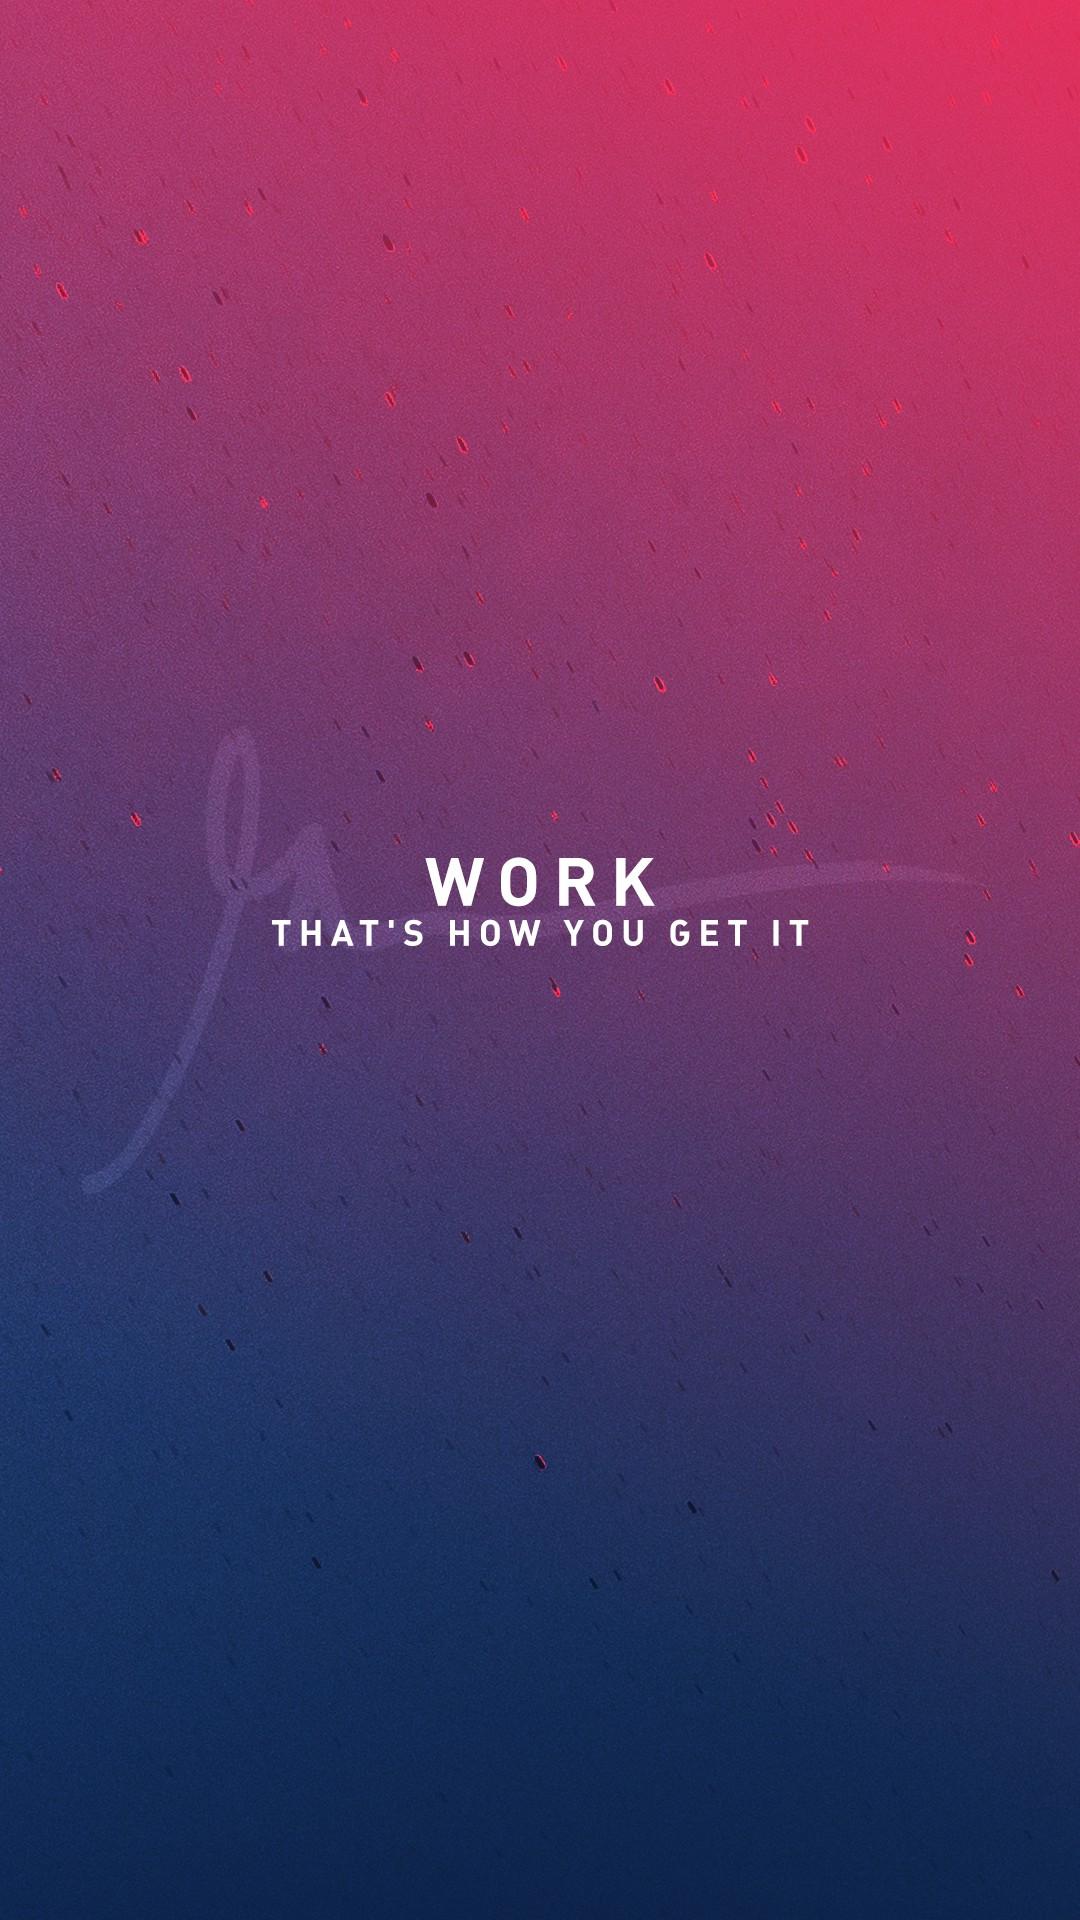 GaryVee WallPapers. Many of you have .medium.com